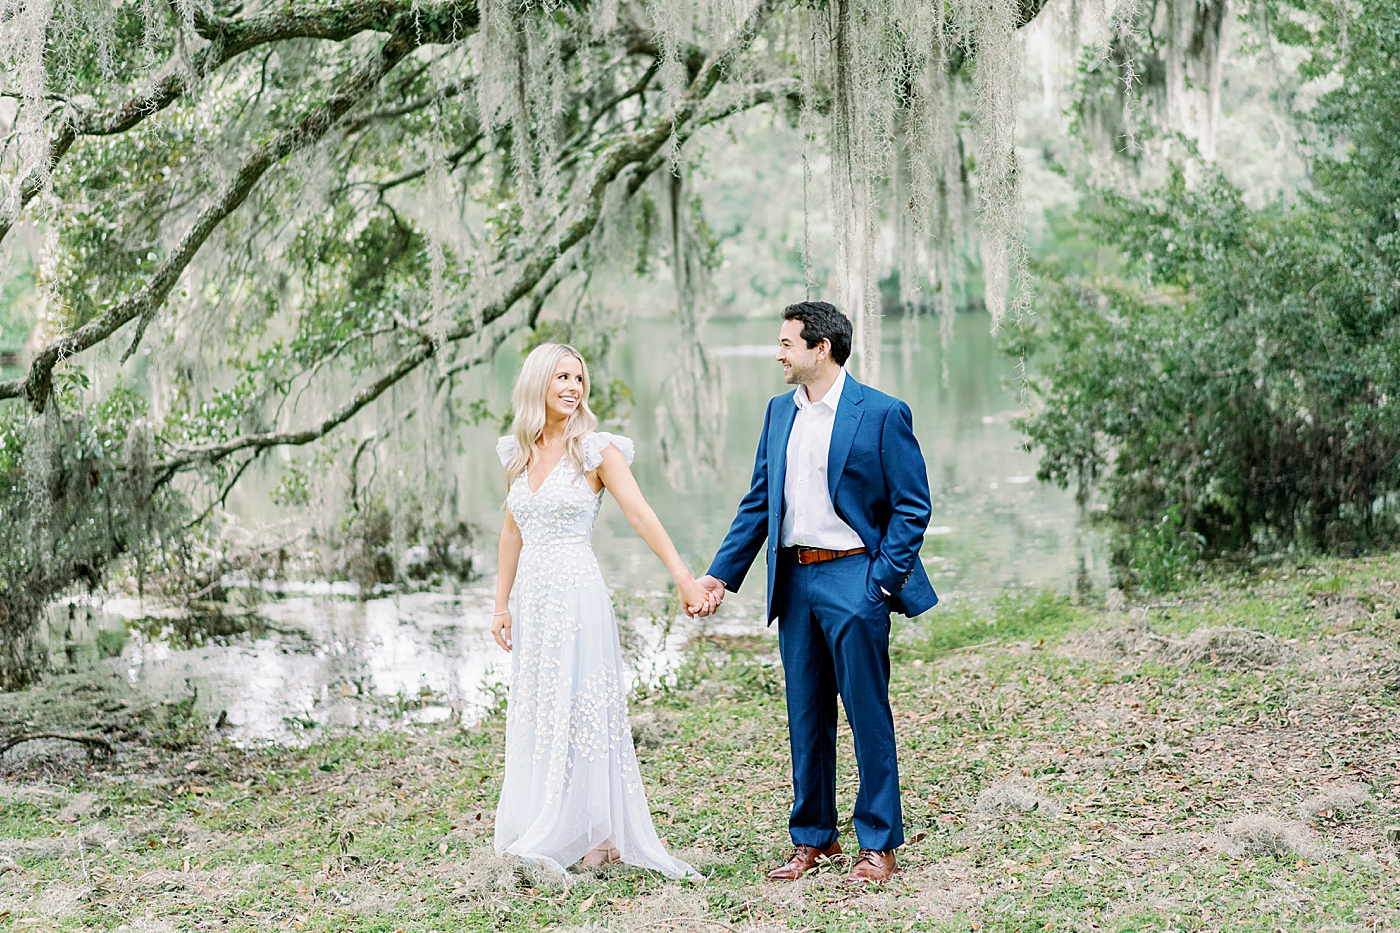 Couple holding hands under oak trees and spanish moss | Image by Annie Laura Photo